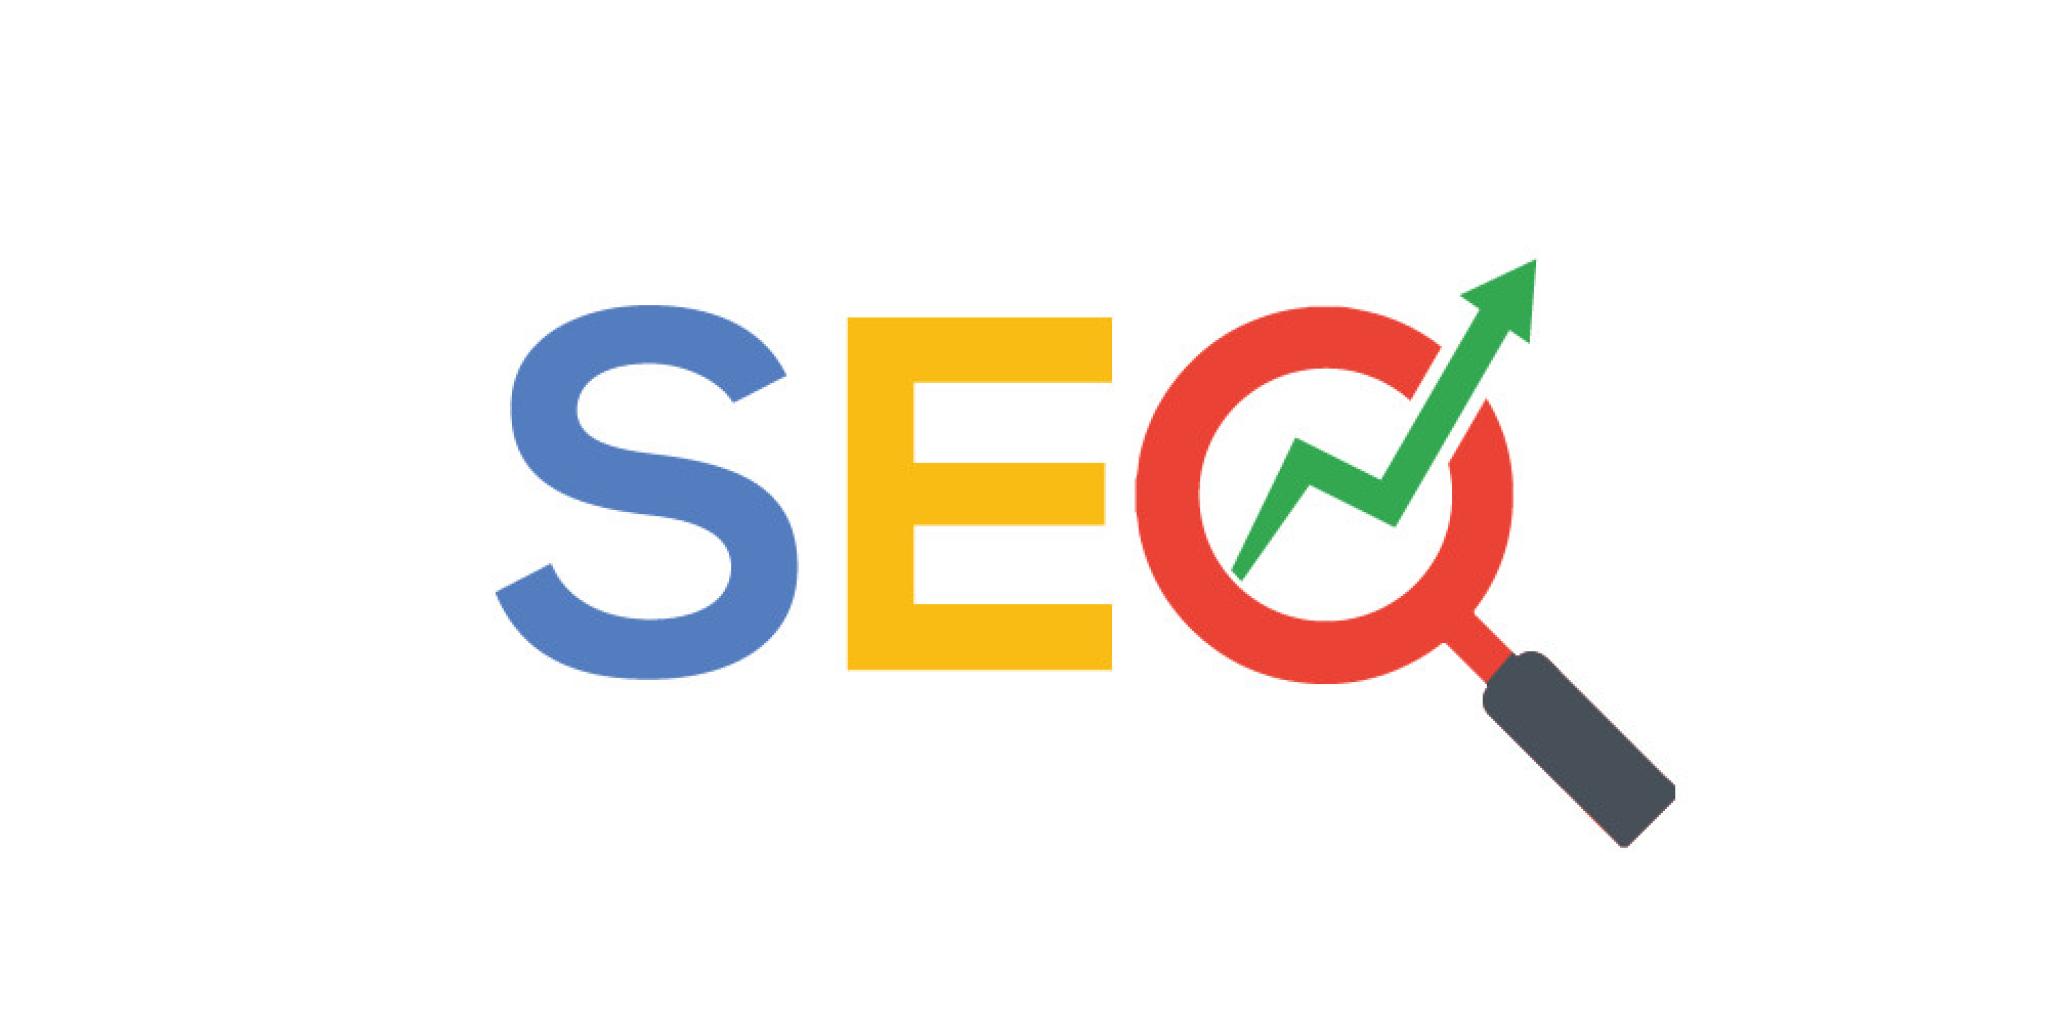 How Does SEO Works?